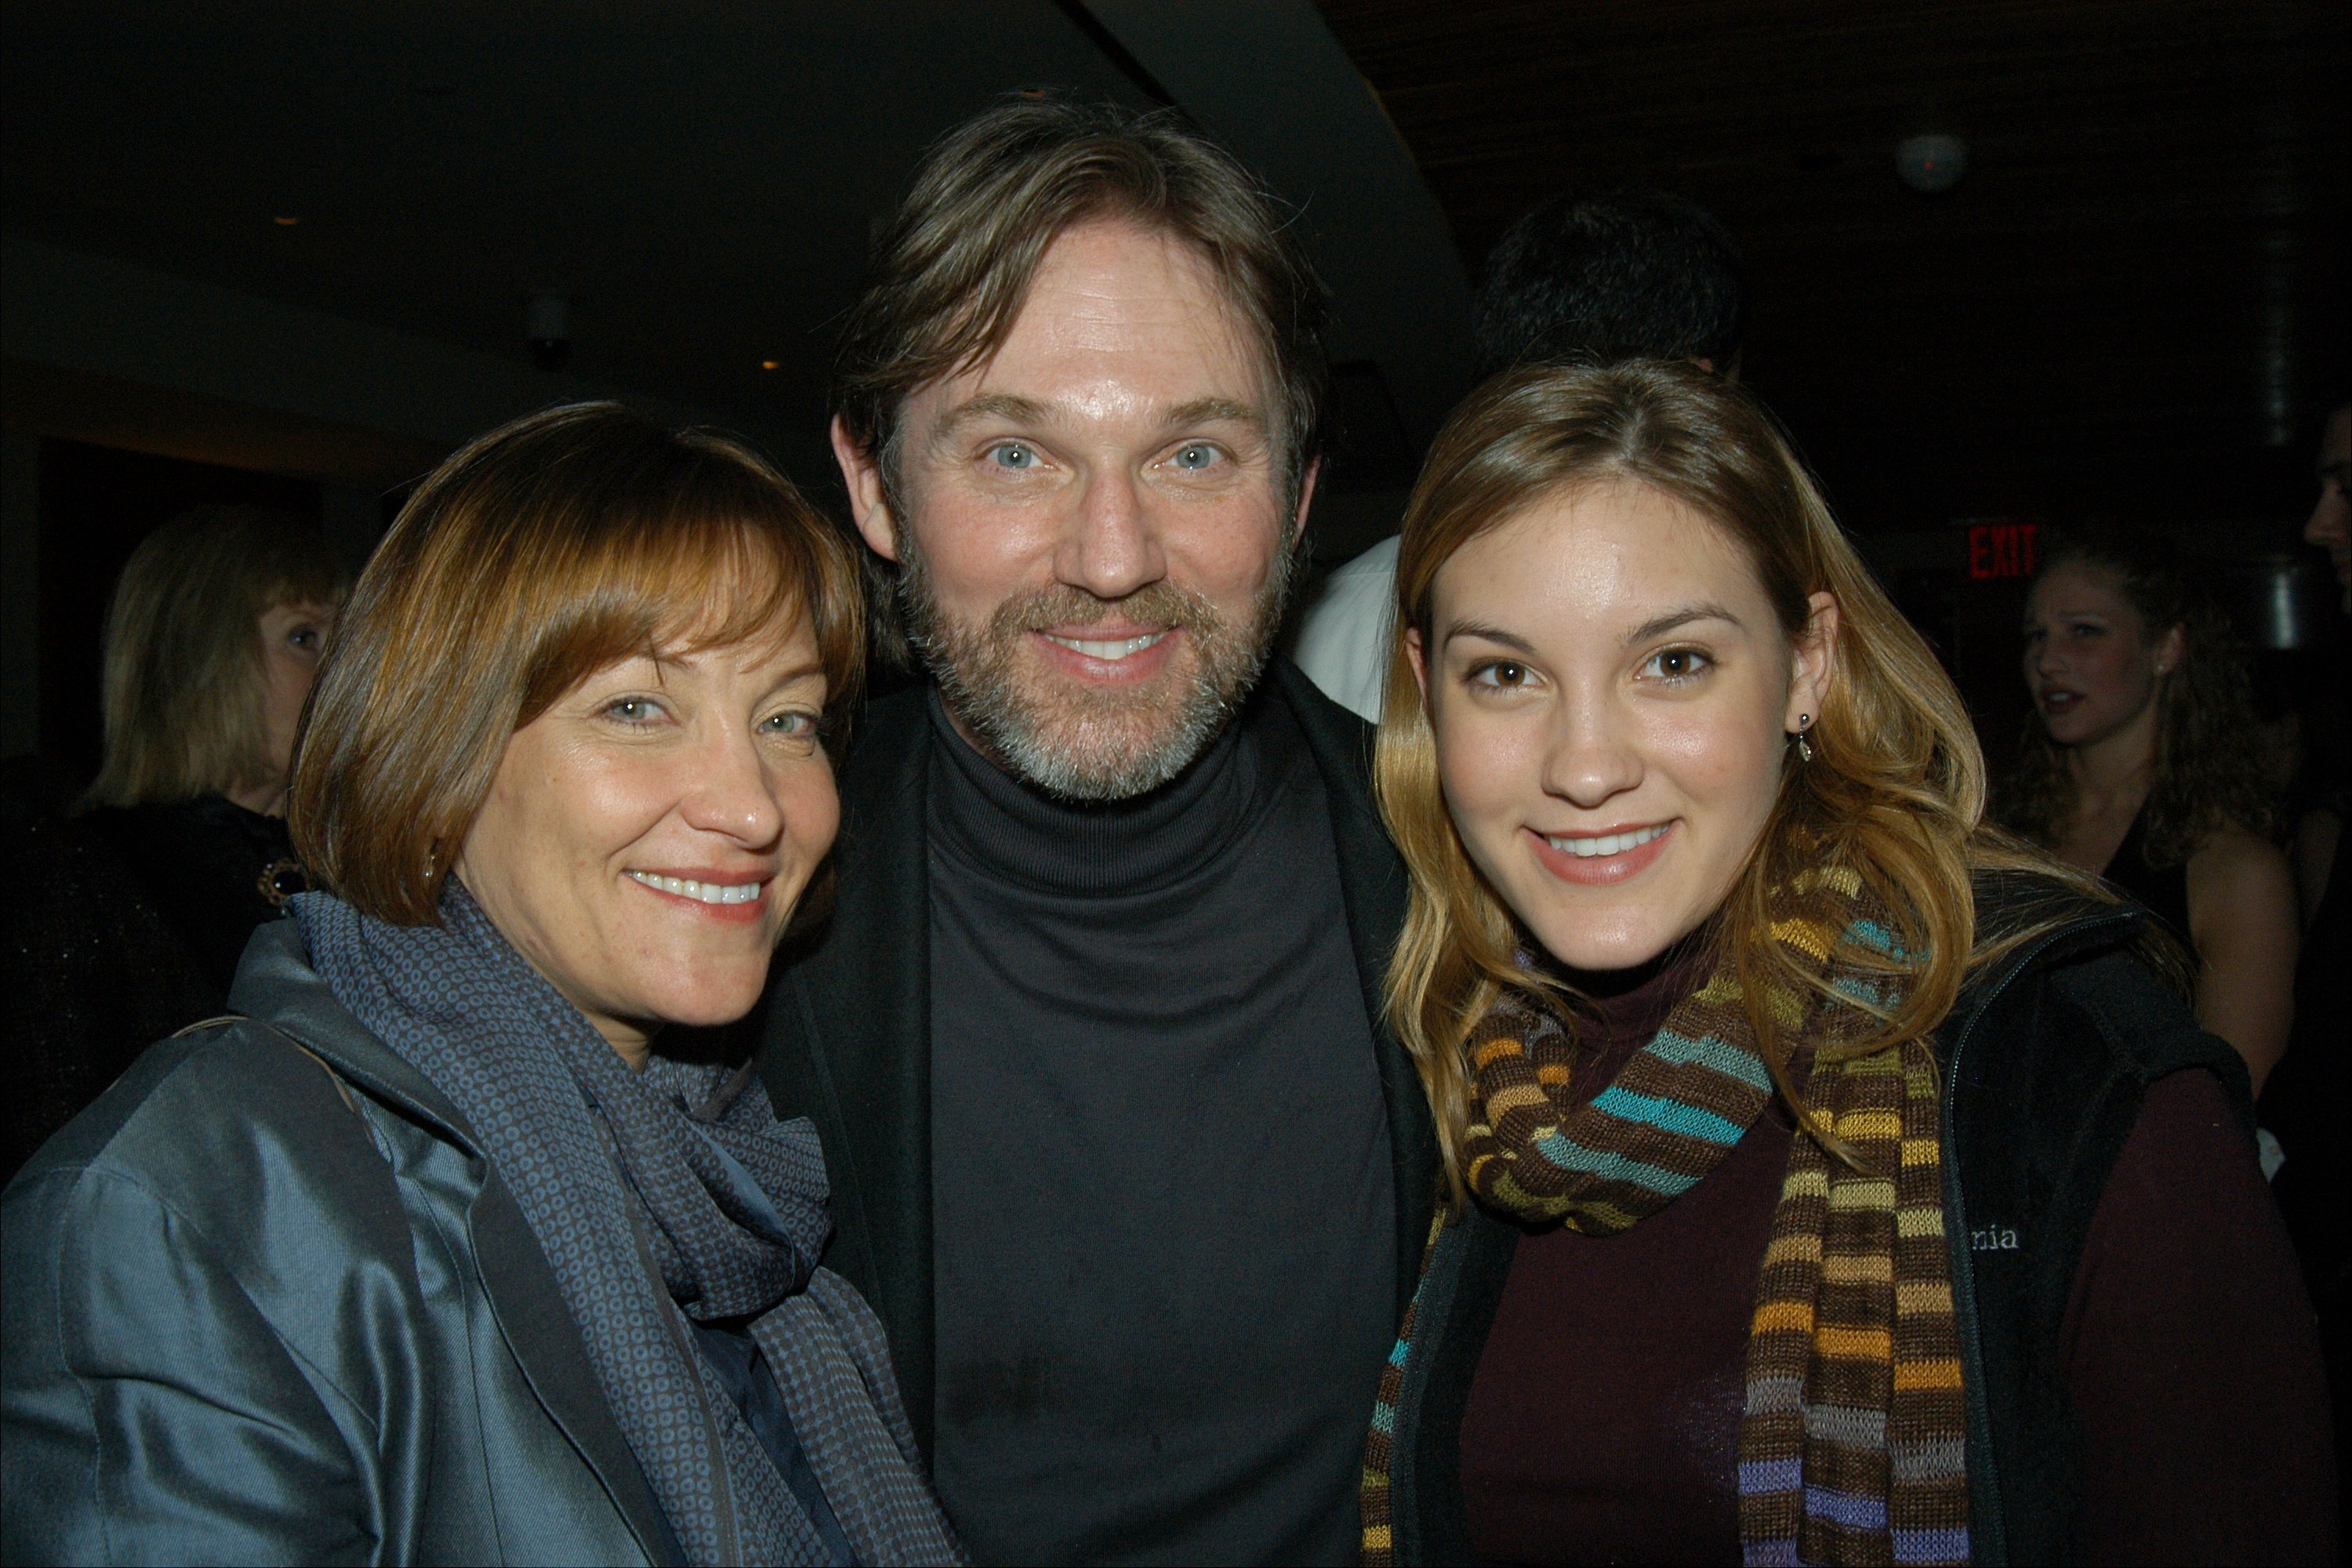  Richard Thomas is joined by wife Georgiana and daughter Kendra at an opening night party for the play "The Stendhal Syndrome" at Fred's at Barney's on Madison Ave, 2004 | Source: Getty Images